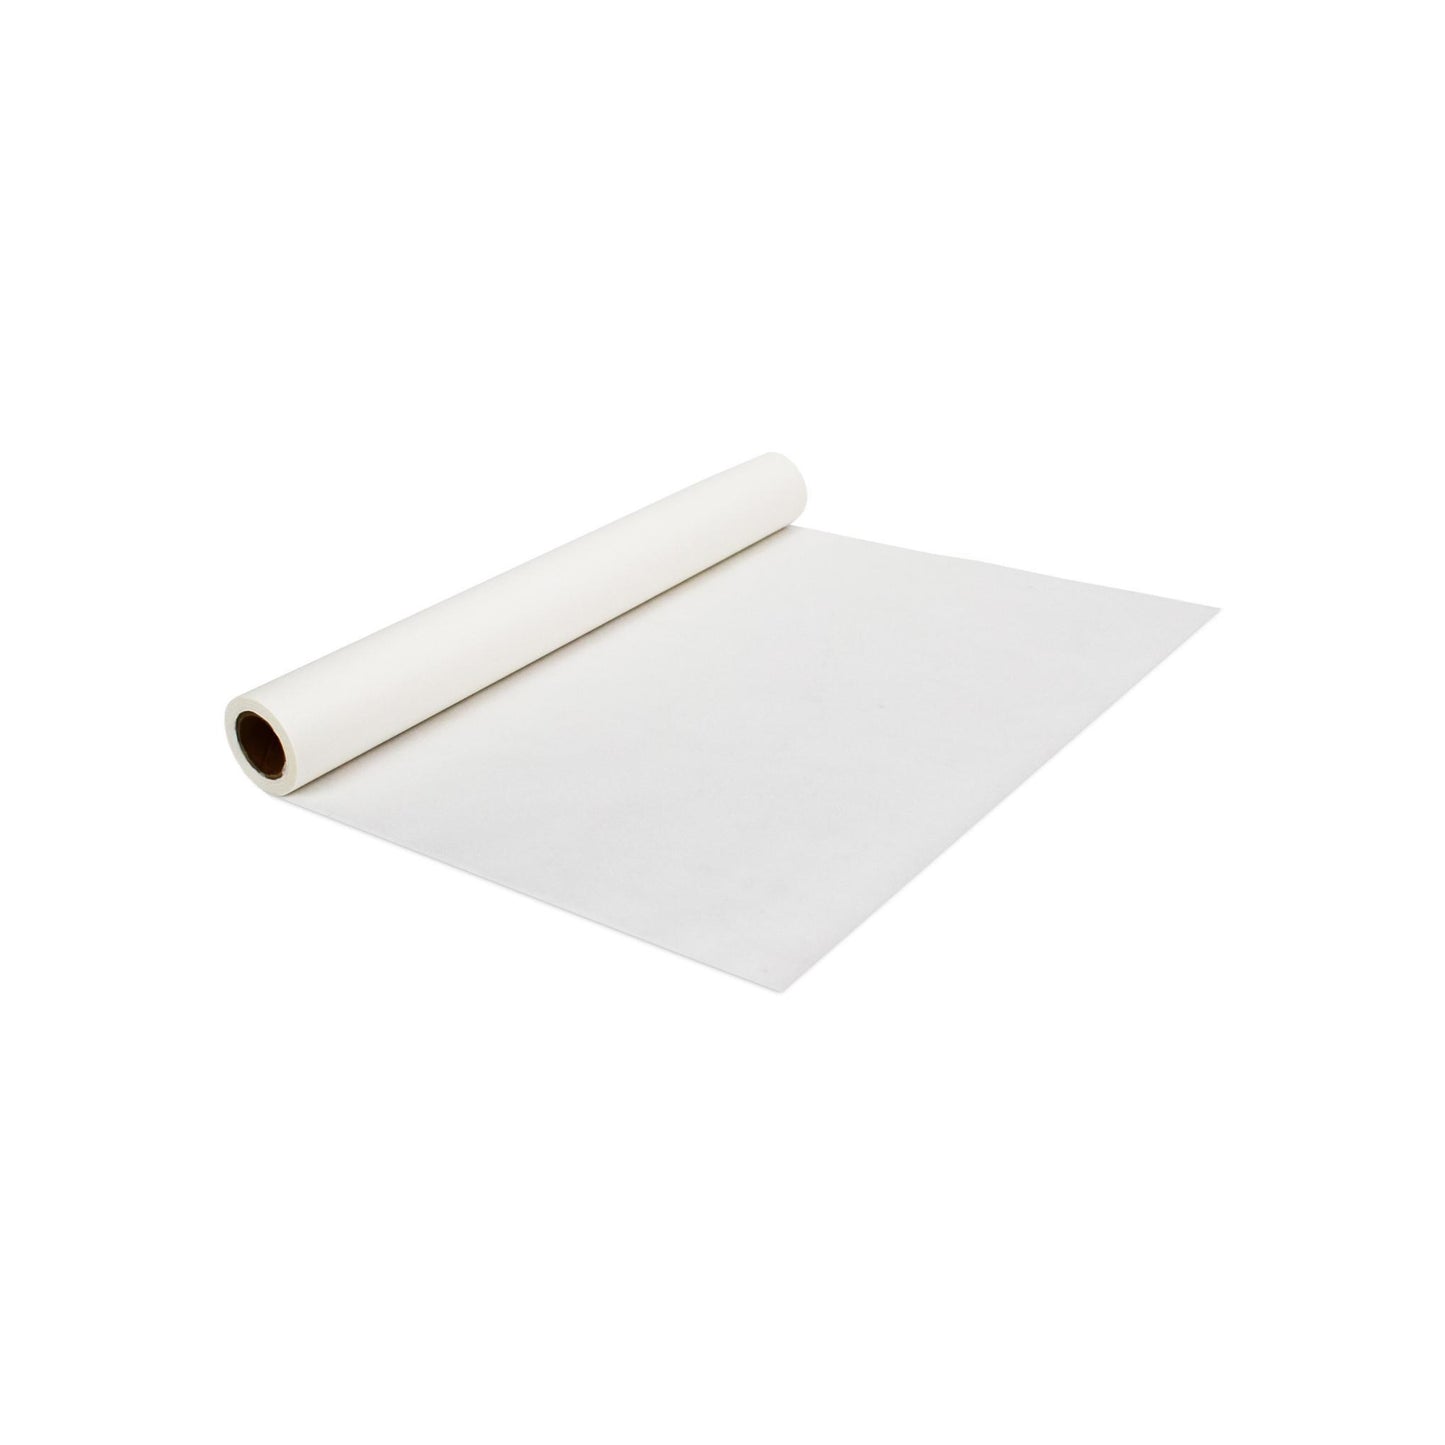 Operitacx 500 Sheets Copy Transparent Paper Tracing Paper Printing Paper  8.5 x 11 White Waterslide Paper Inkjet Clear White Trace Paper Sketching